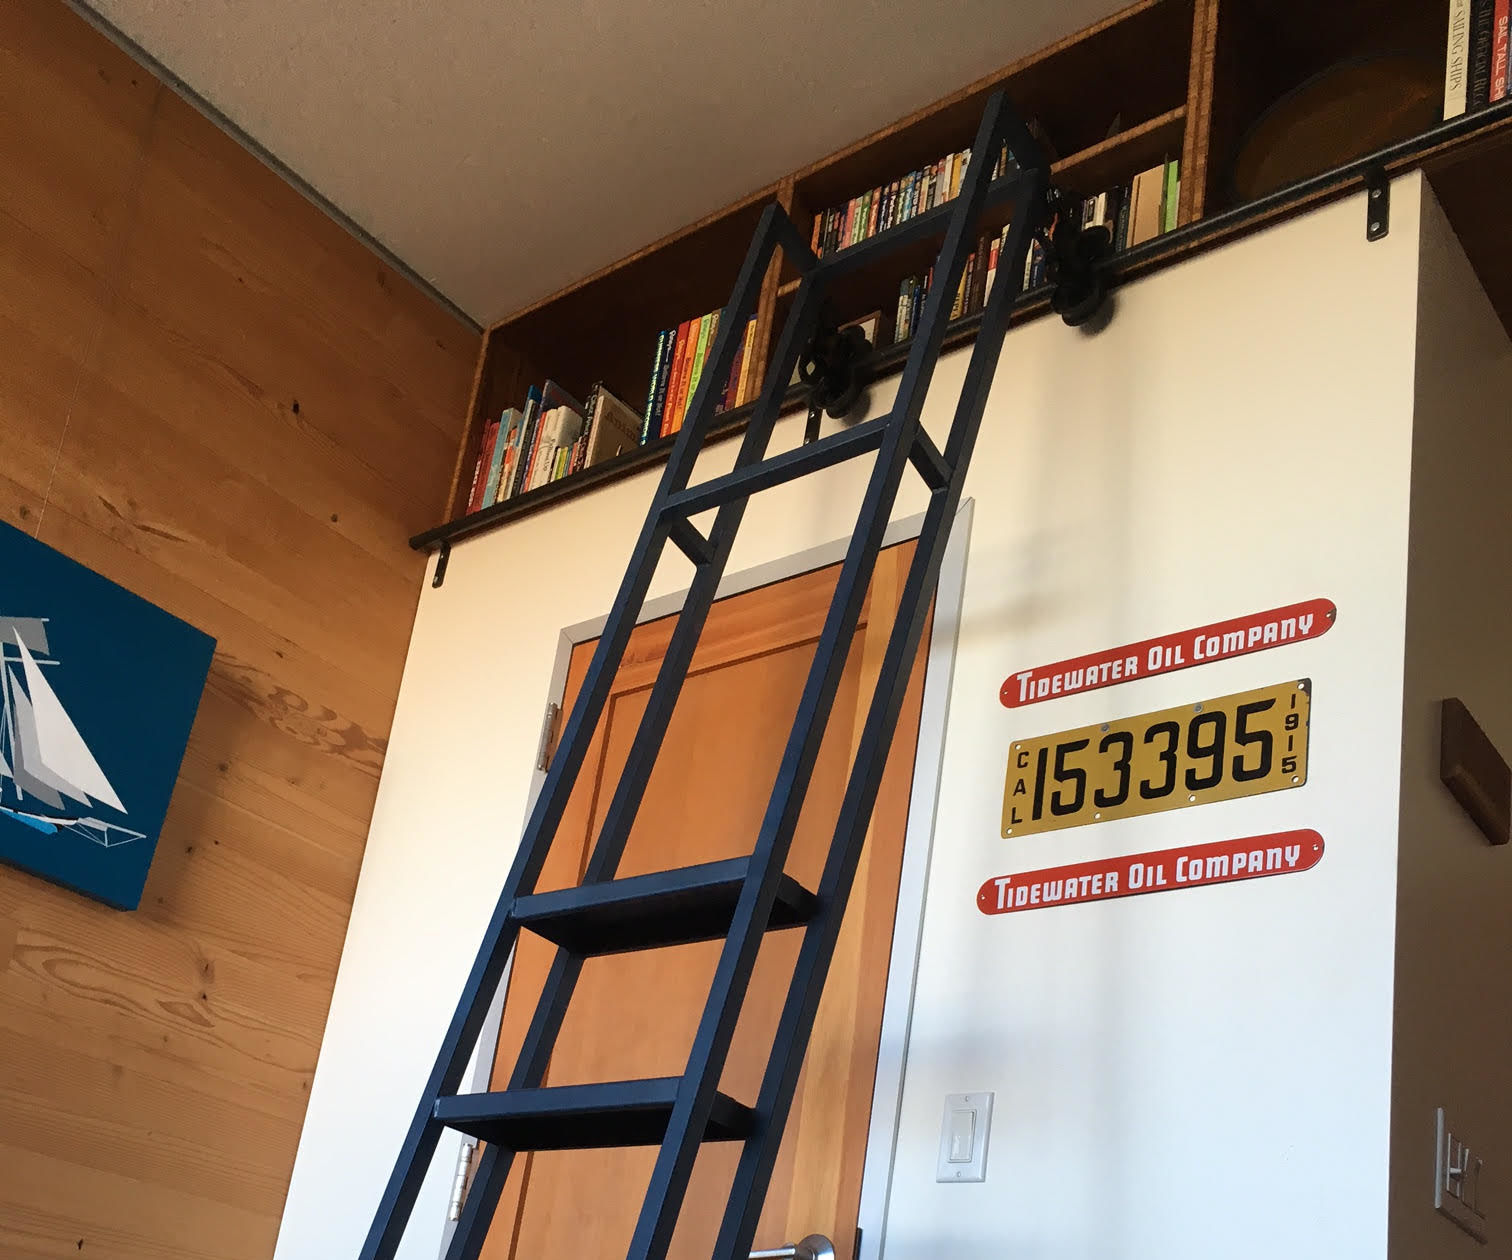 Ceiling bookshelf with library ladder